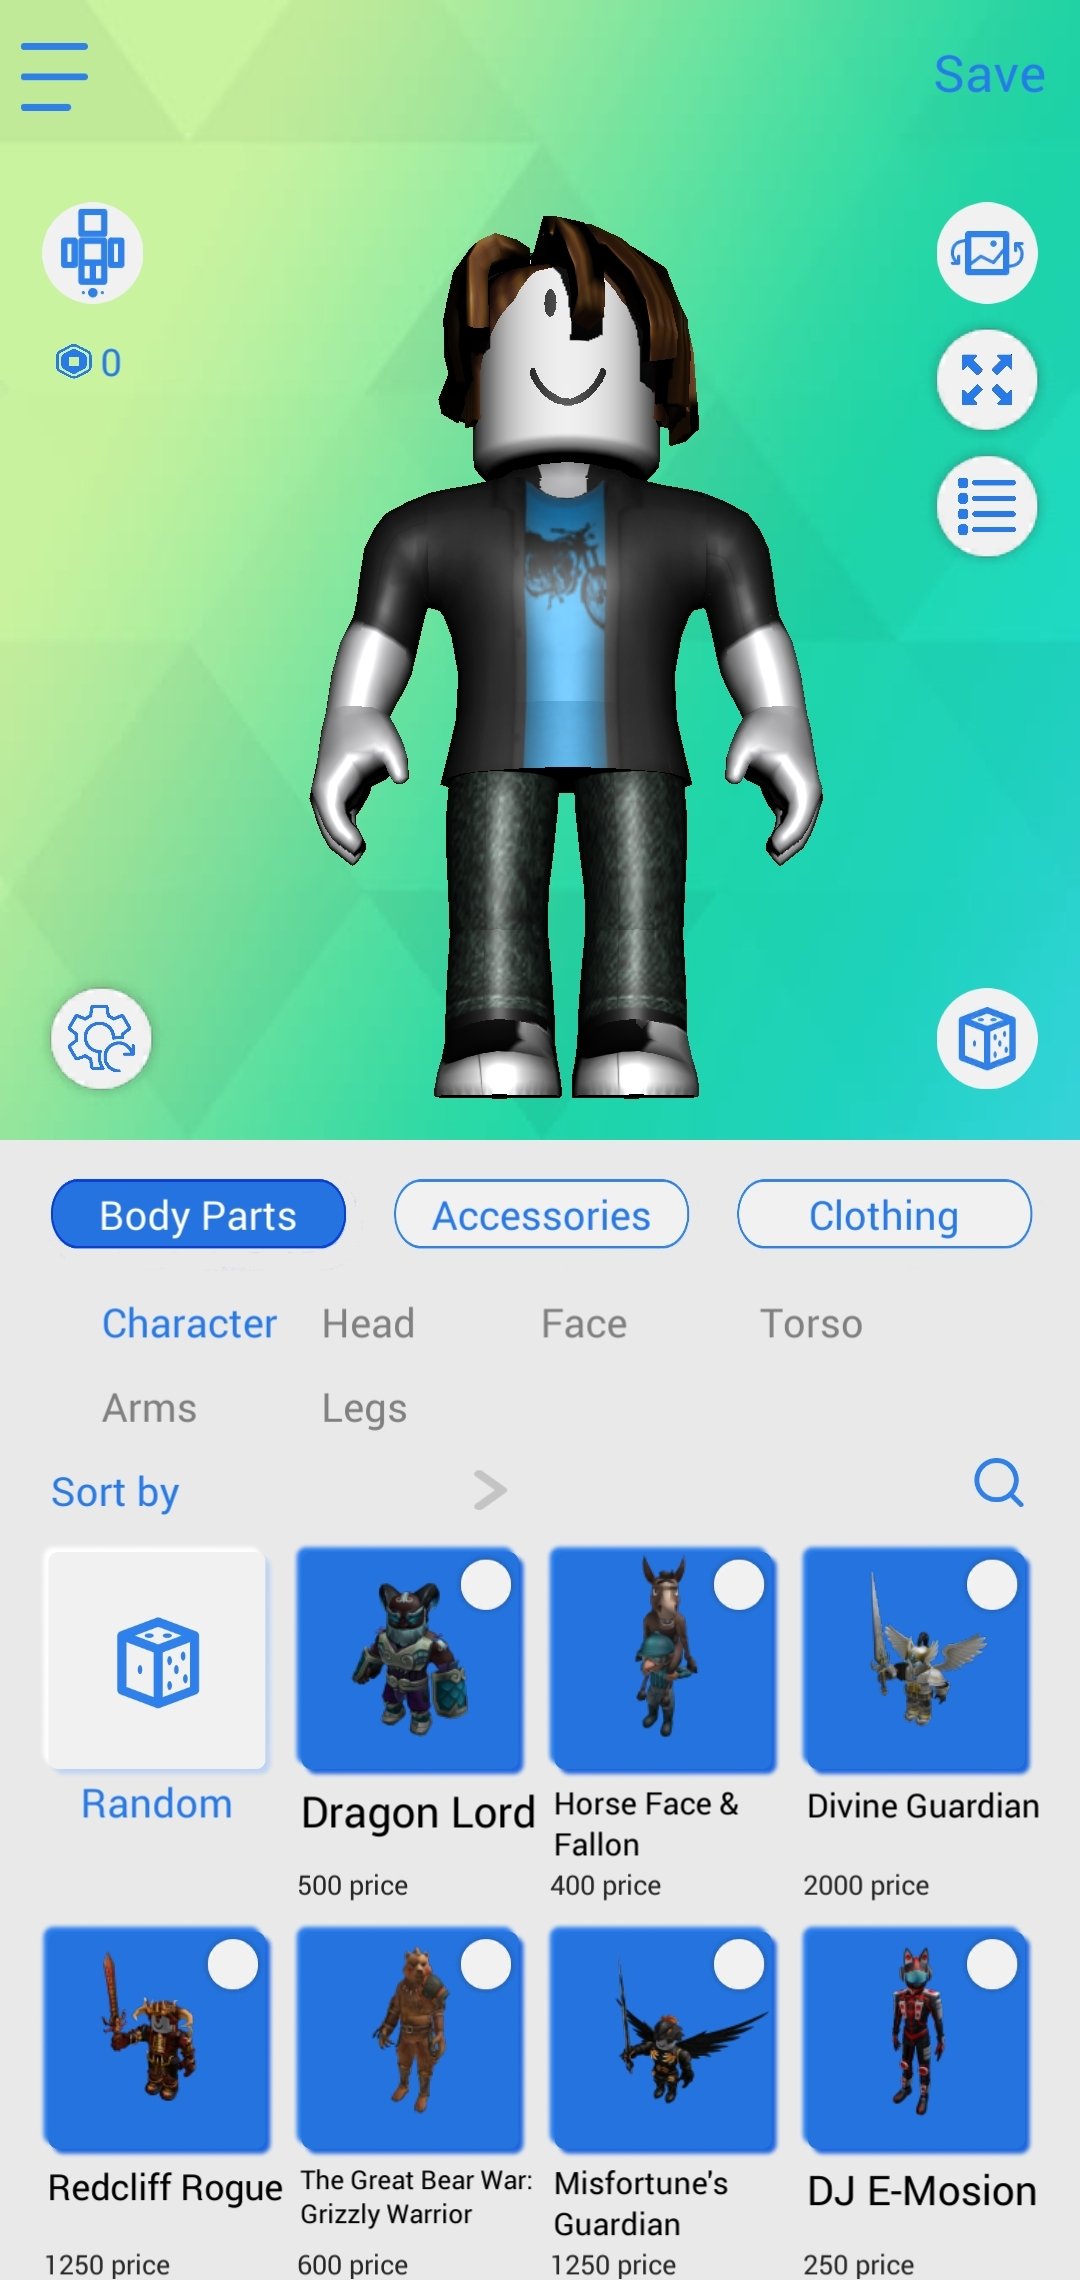 Master Skins For Roblox Platform for Android - Download